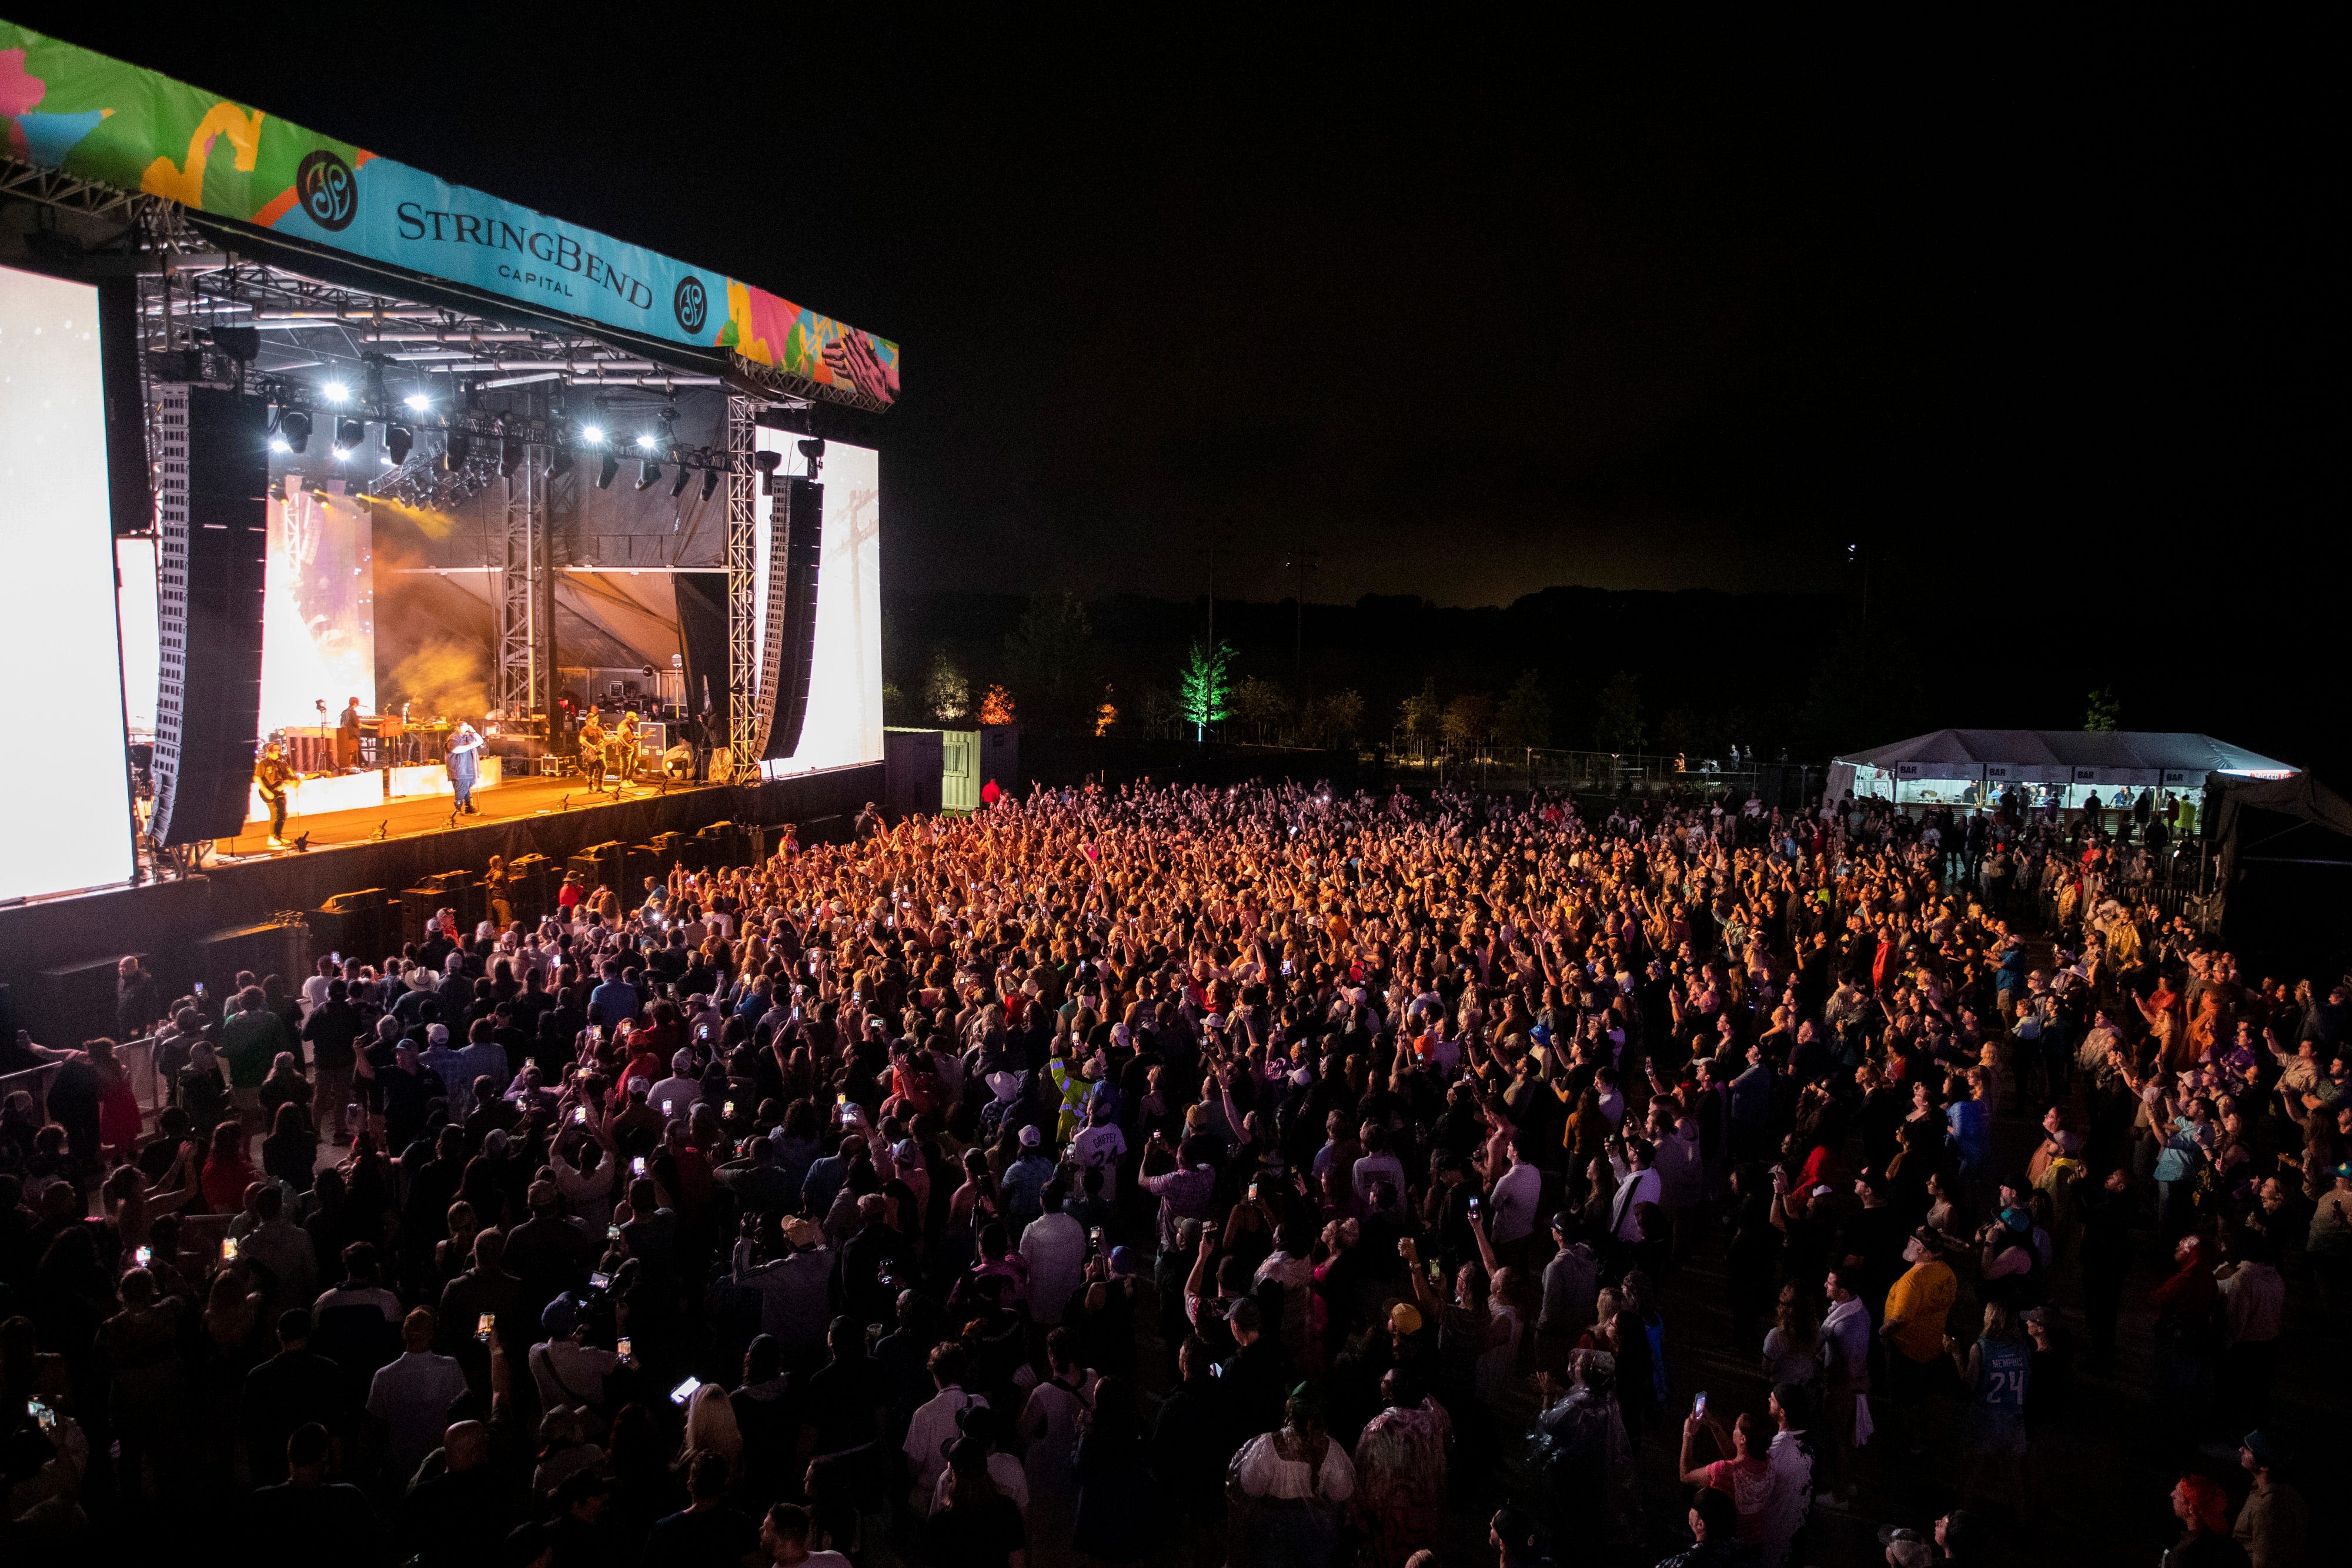 What's next for RiverBeat Music Festival? Organizers planning for a bigger 2025 and beyond